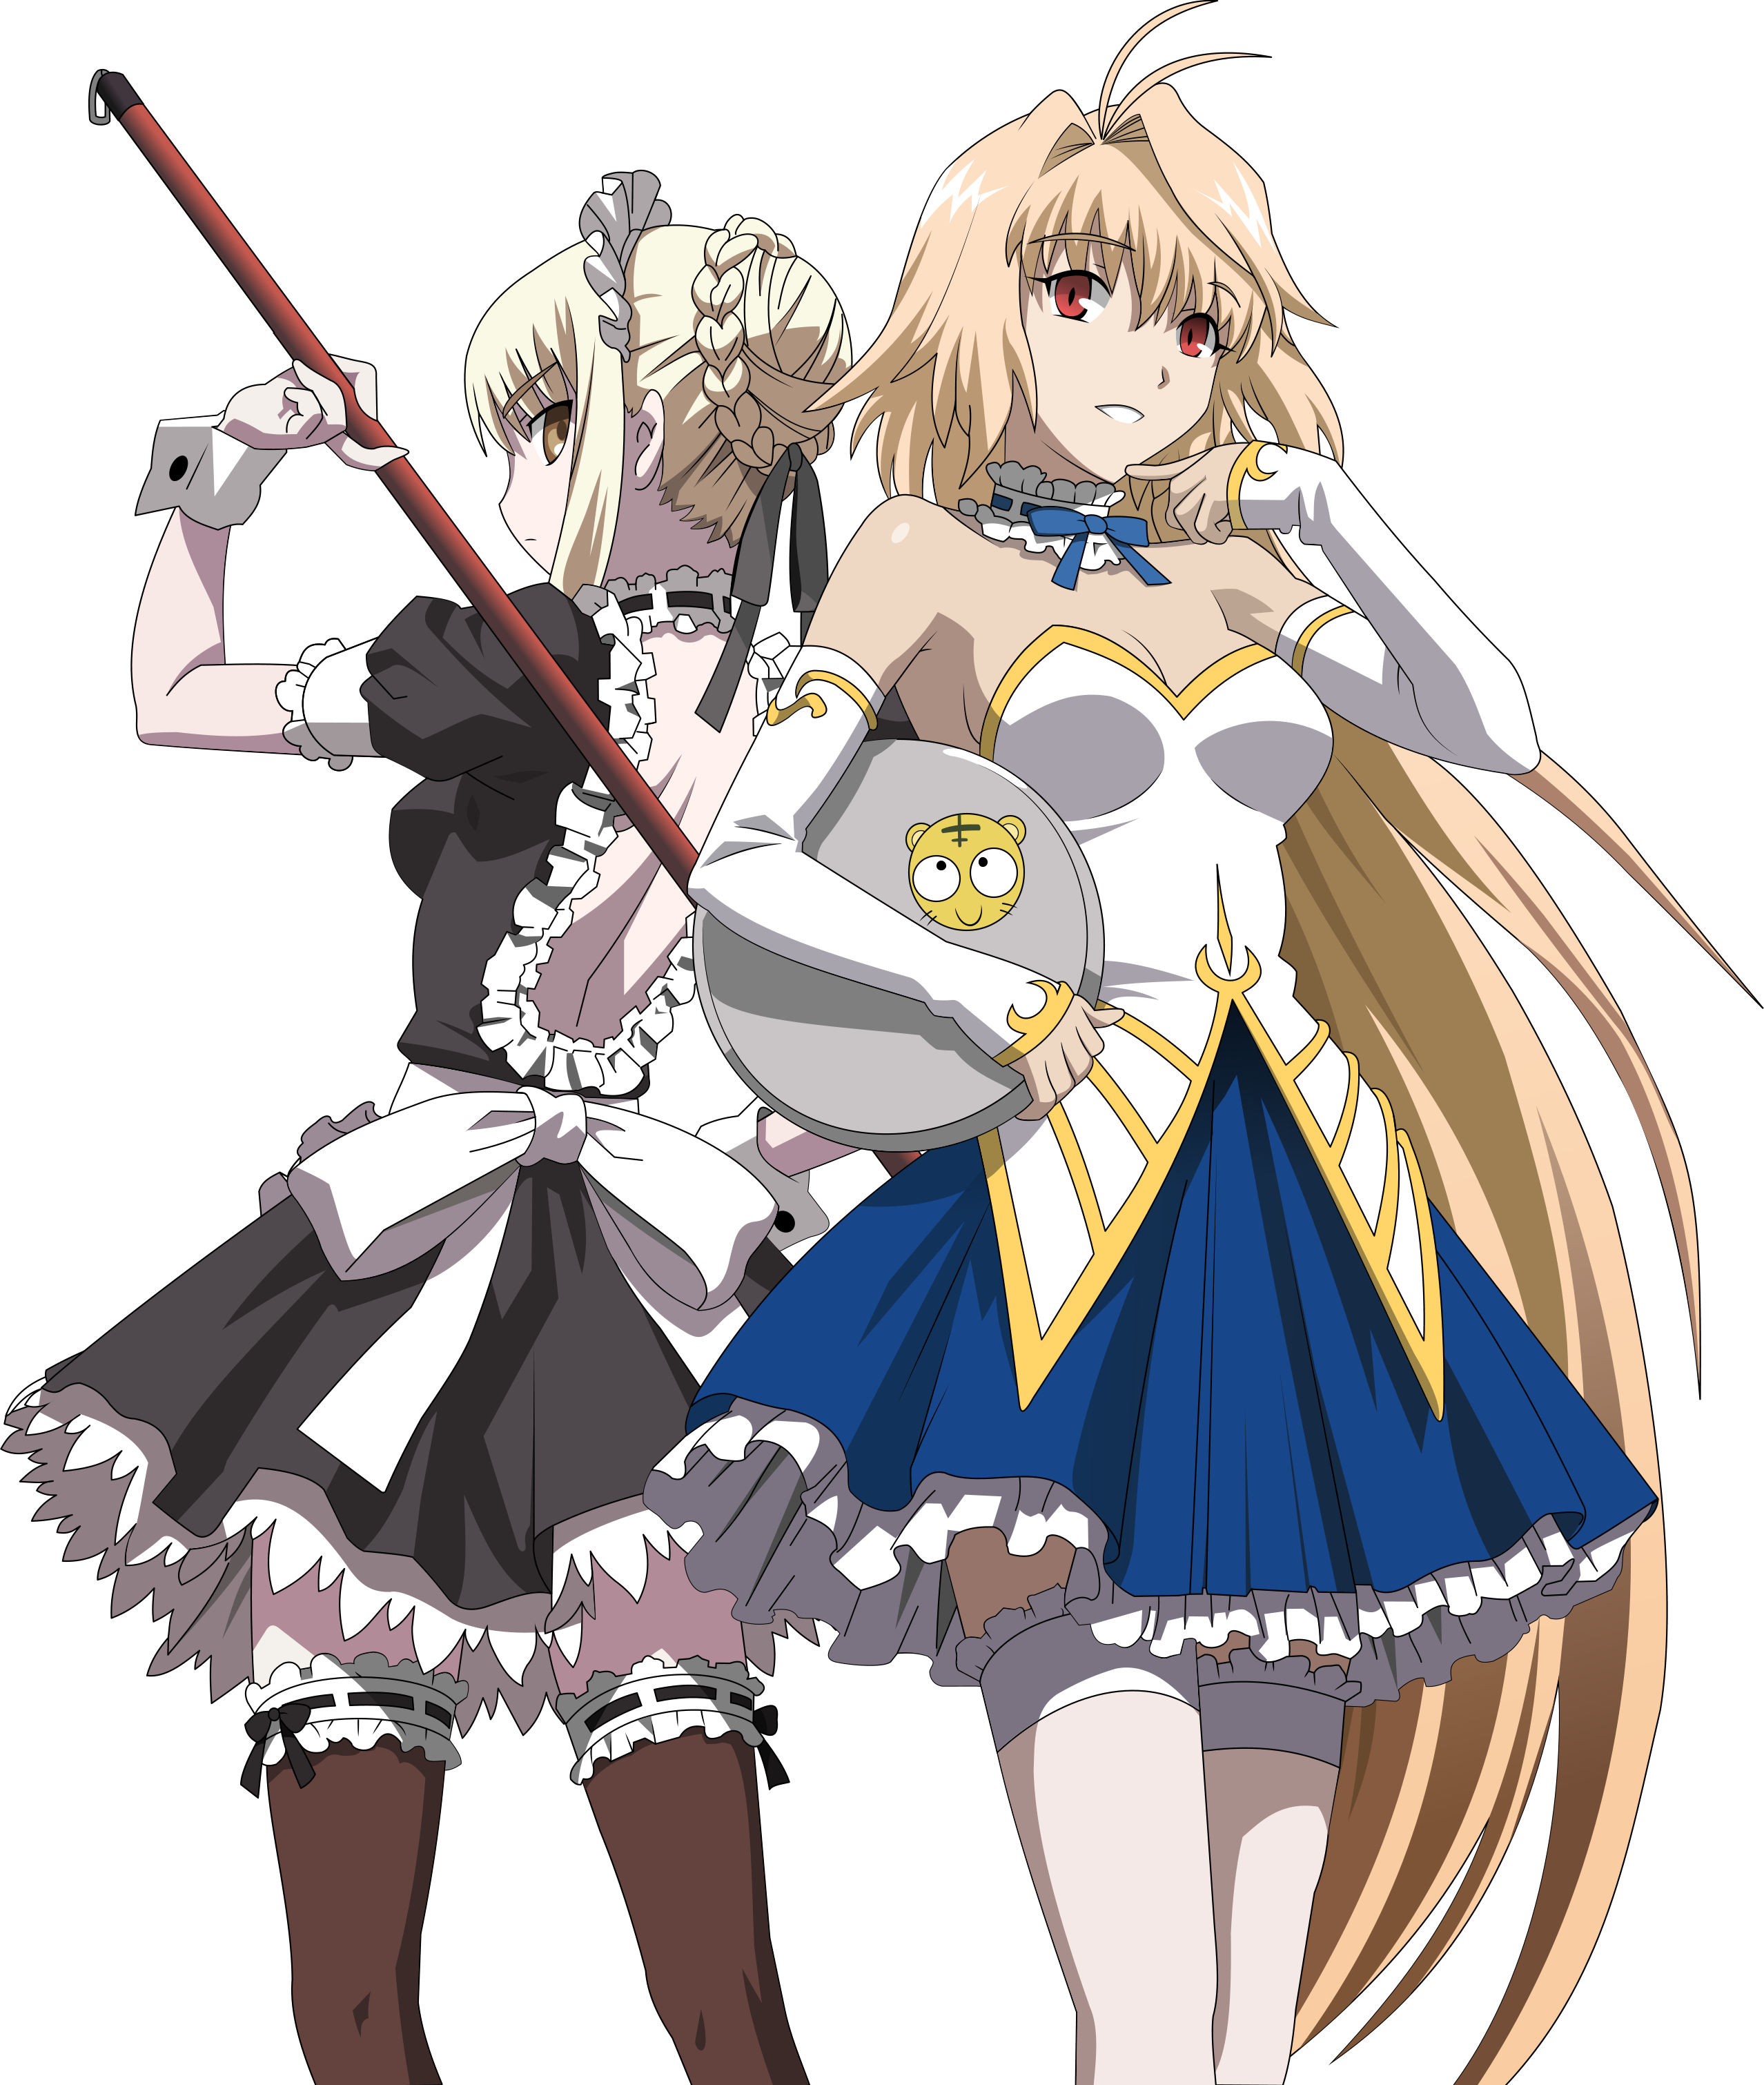 A Couple Of Women Wearing Maid Clothing